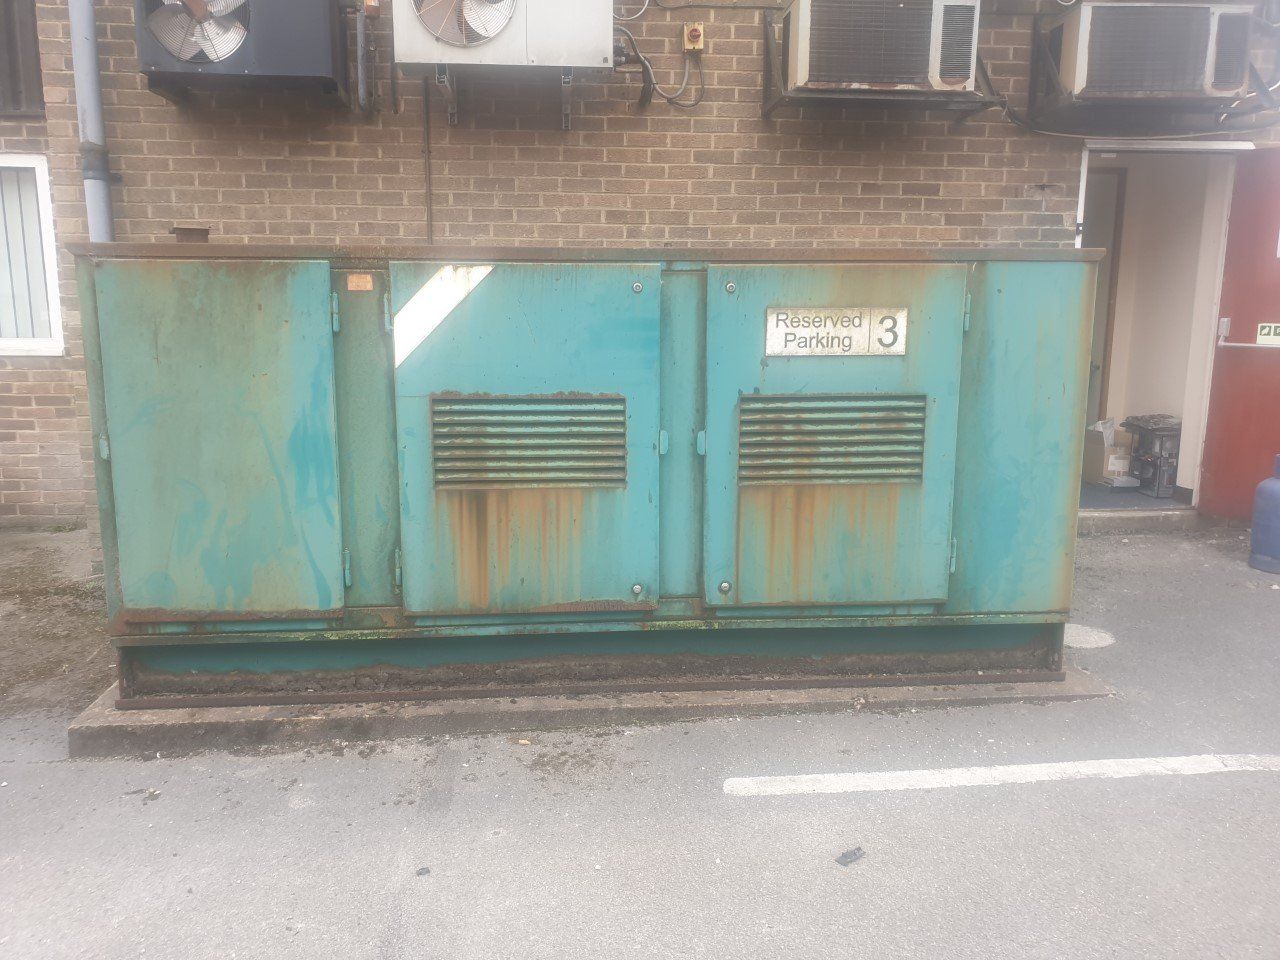 We buy used commercial and industrial generators